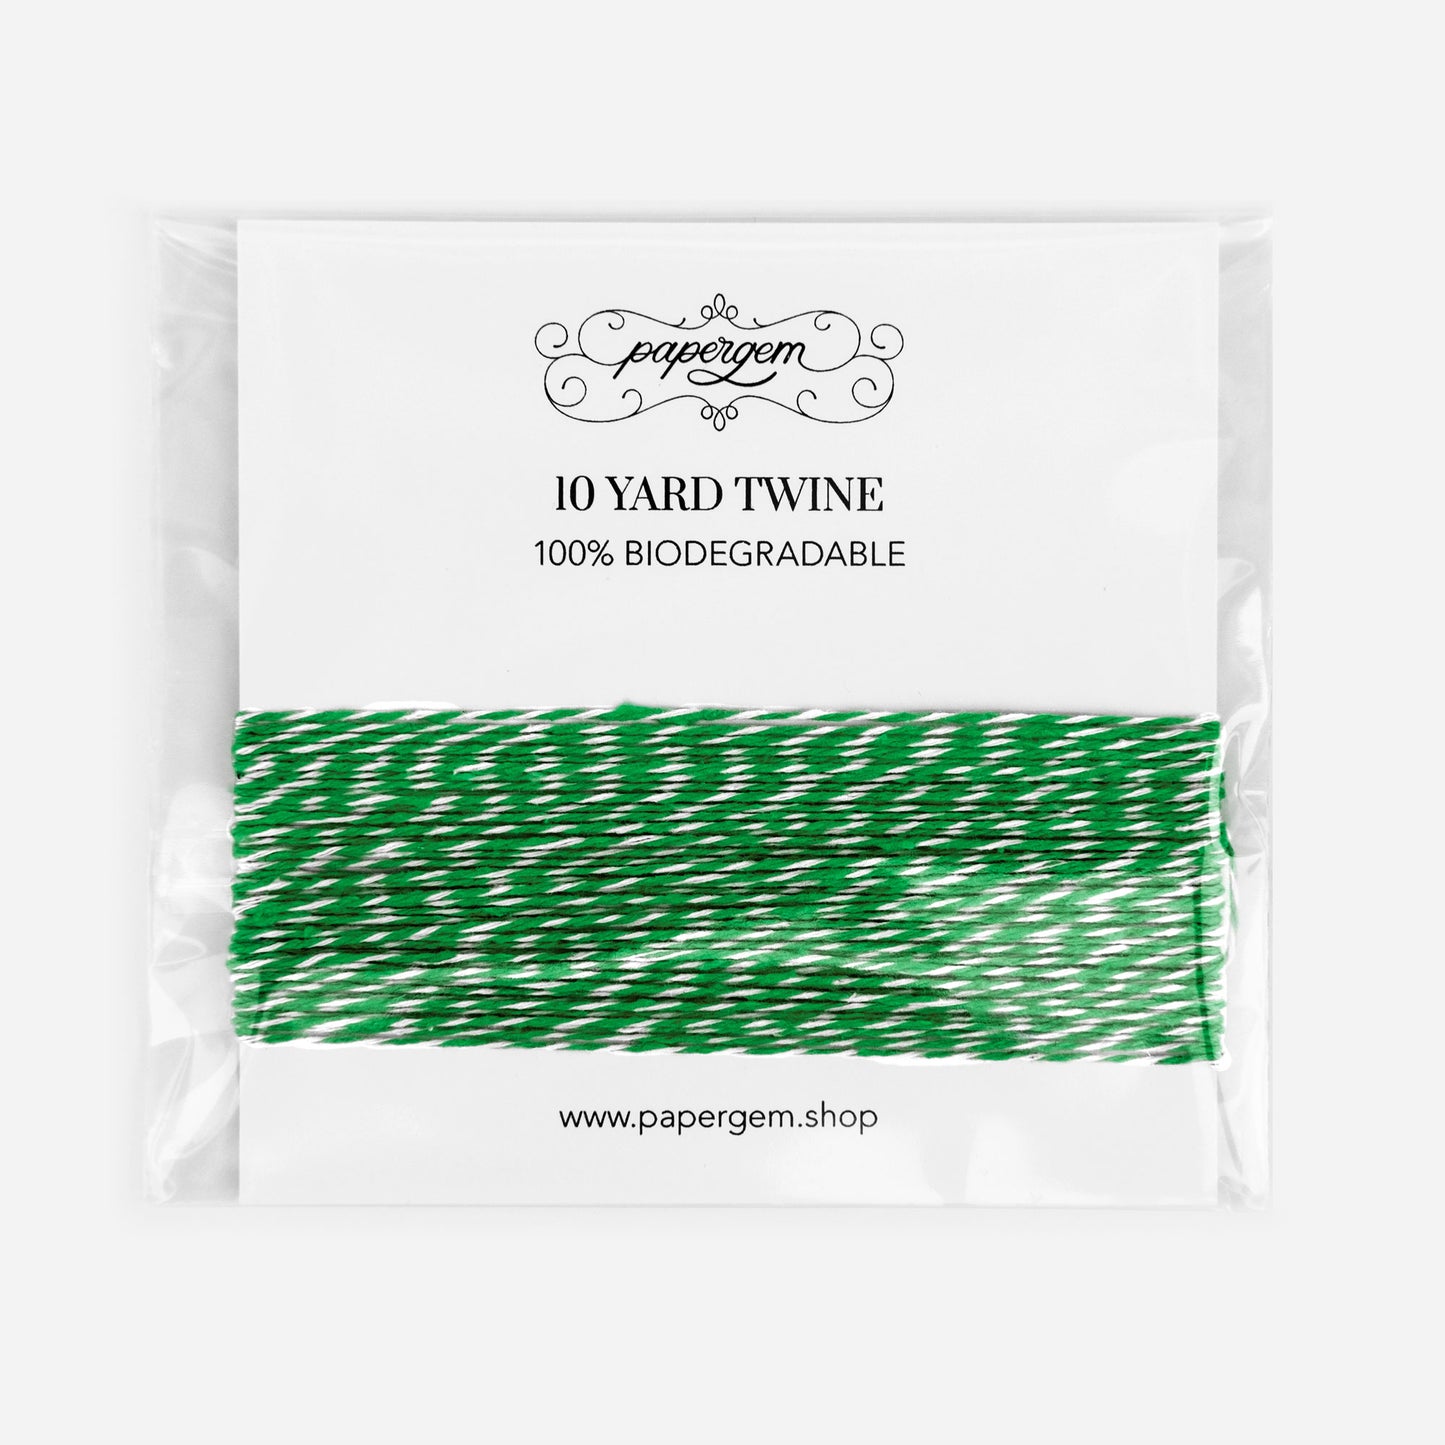 Spruce Green Biodegradable Twine